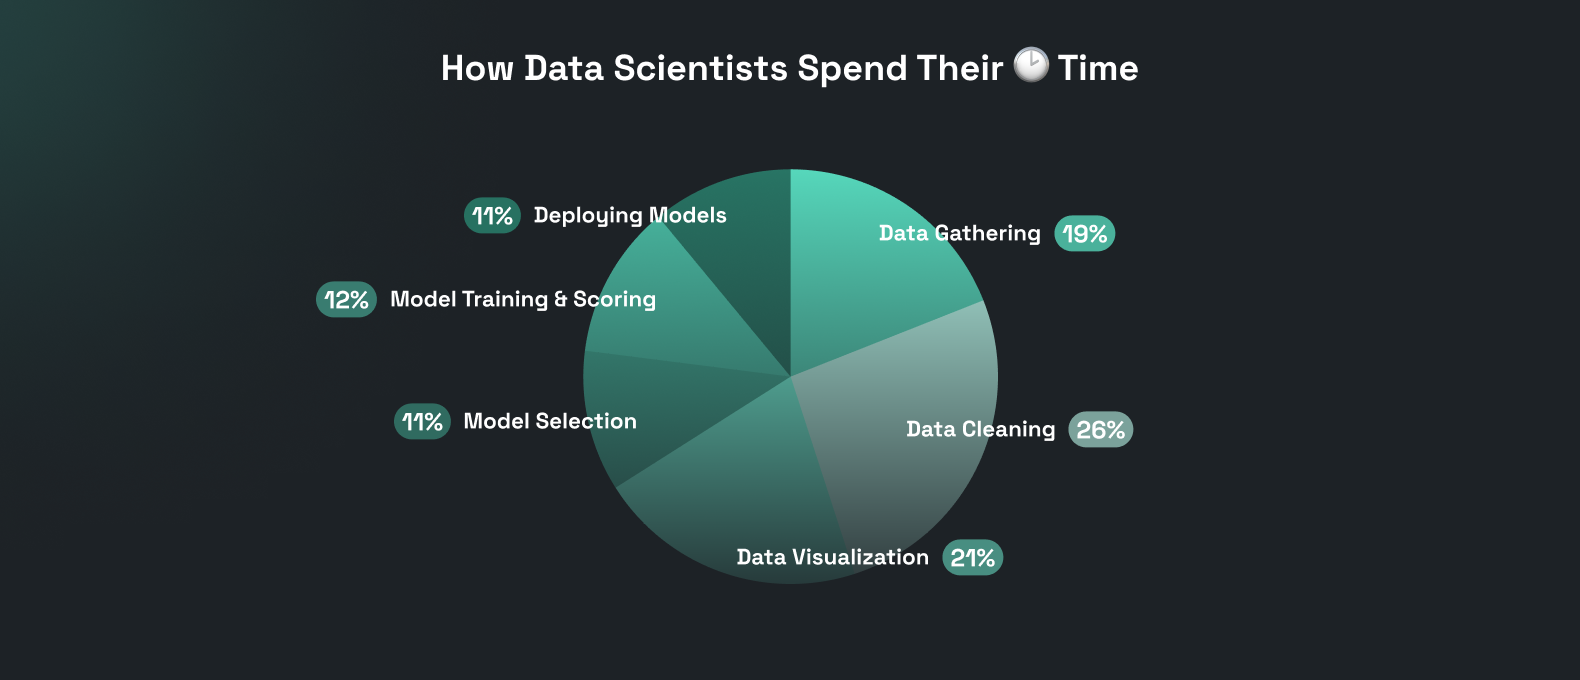 How data scientists spend their time on ml model development